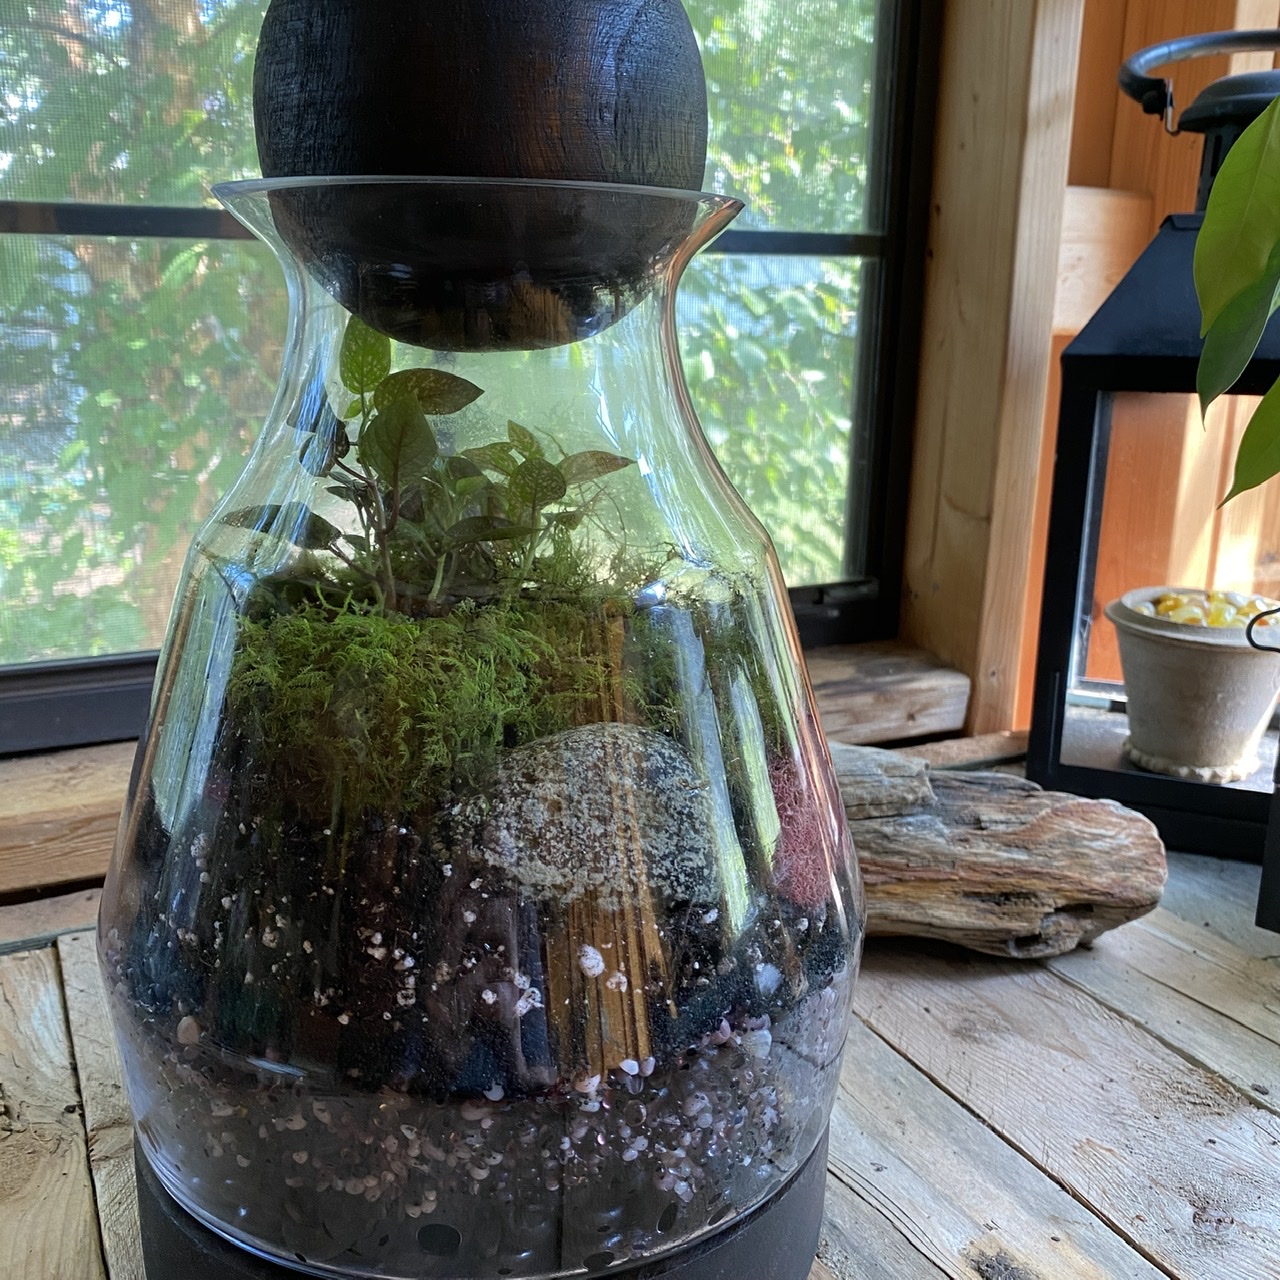 For success with glass terrariums, think small 